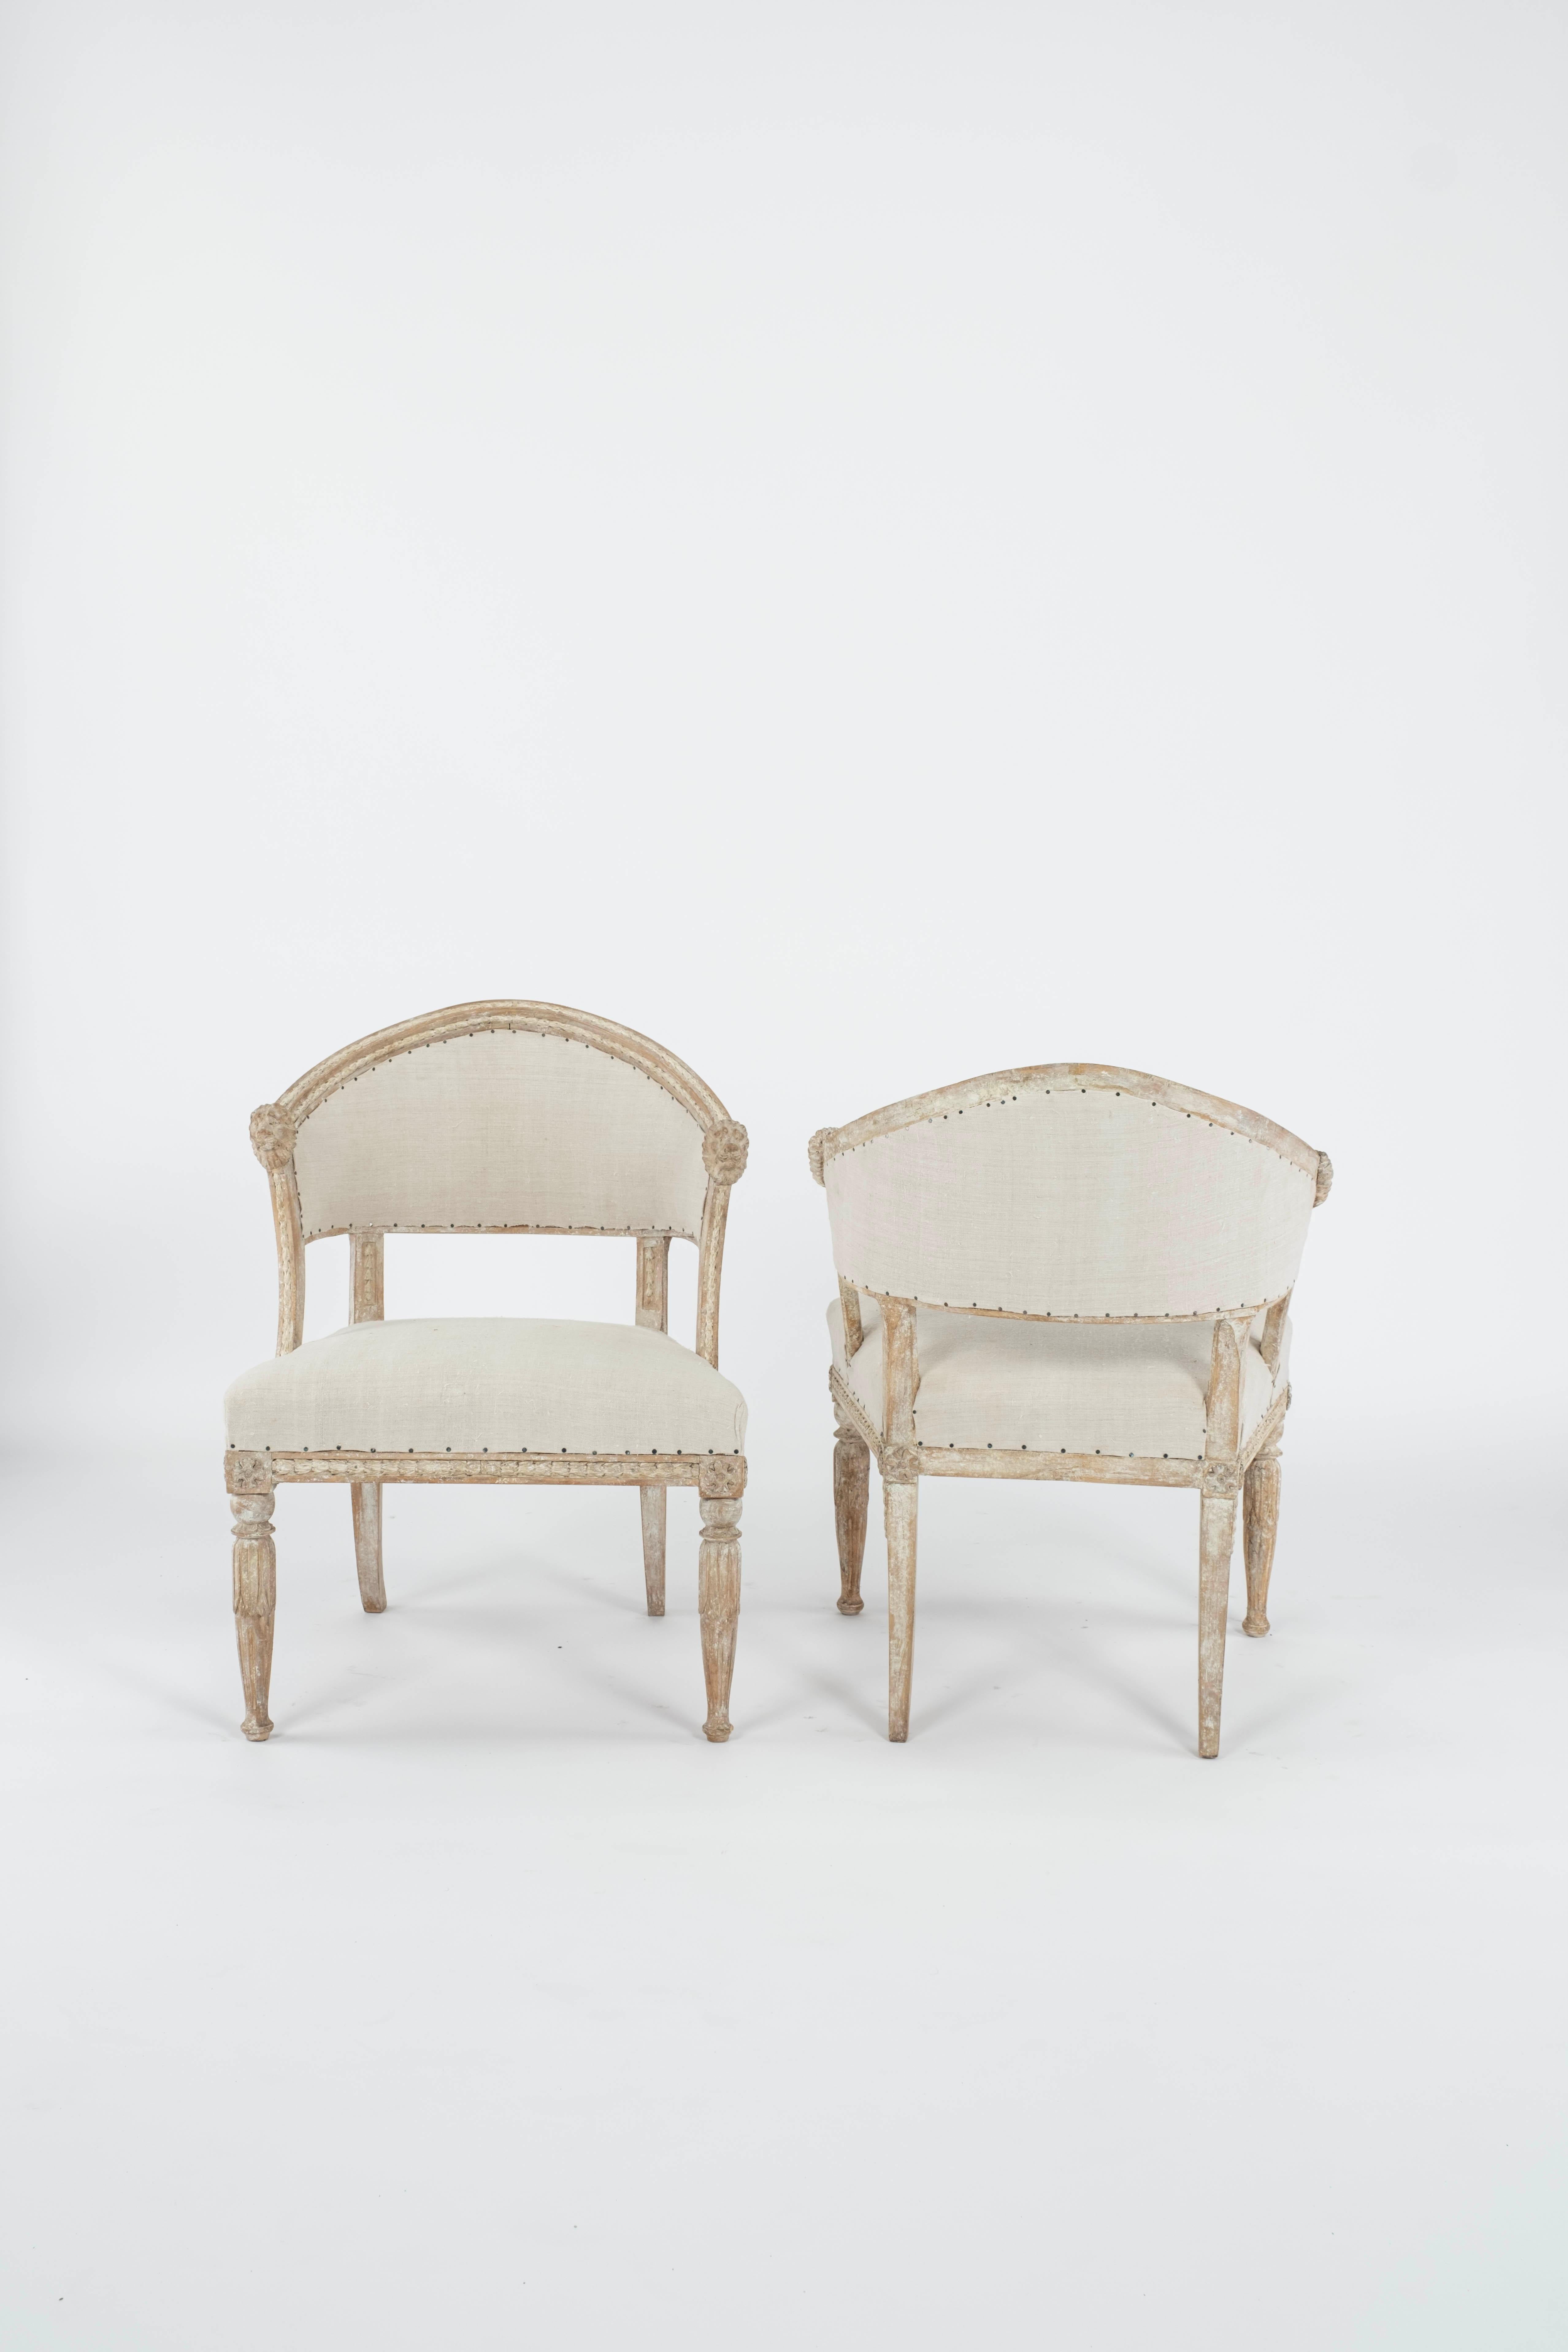 Pair of 19th C. Swedish Gustavian Barrel Back Chairs For Sale 1